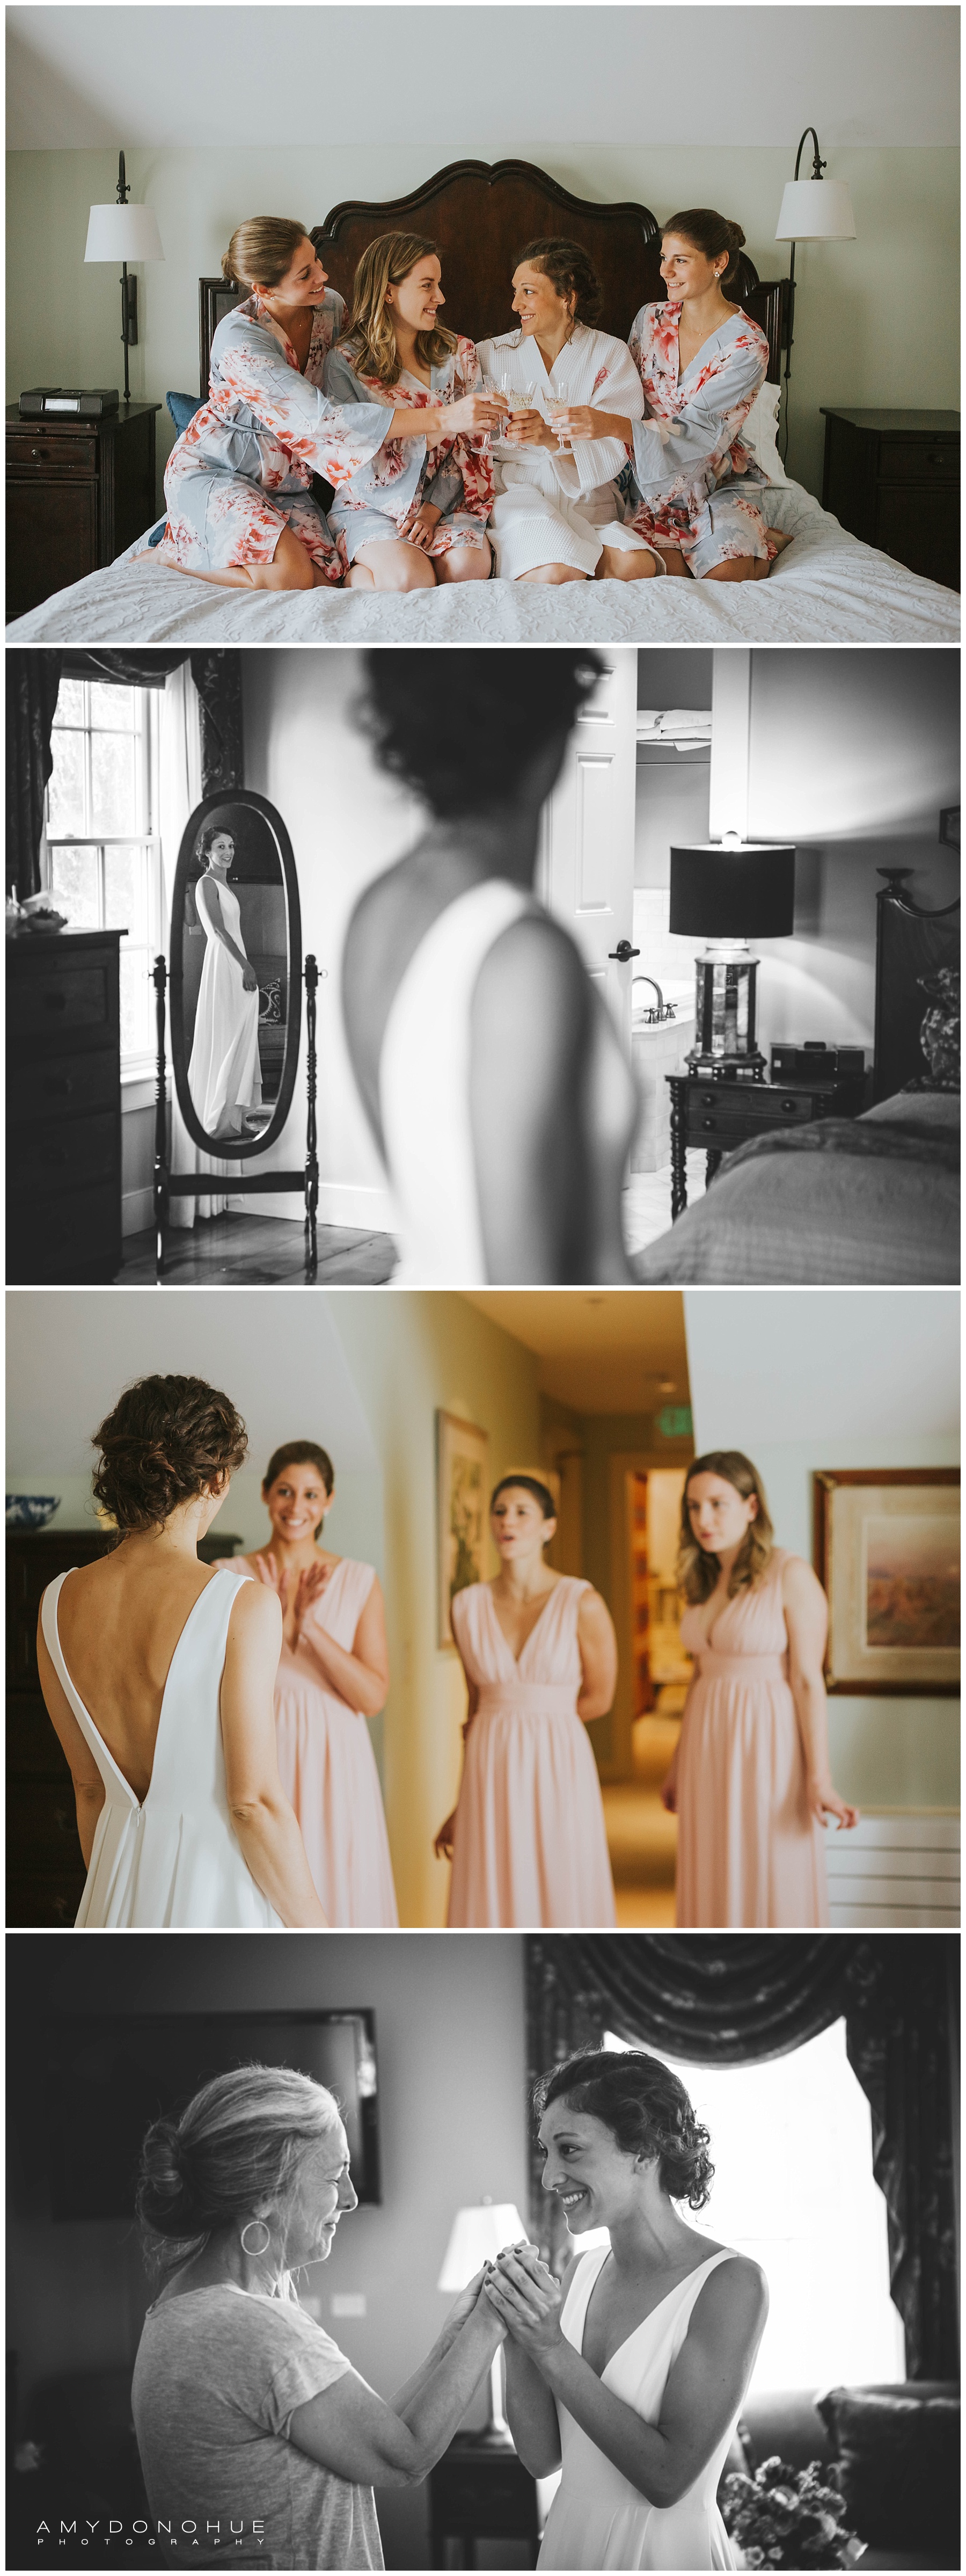 Bridal Reveal with Bridesmaids © Amy Donohue Photography 